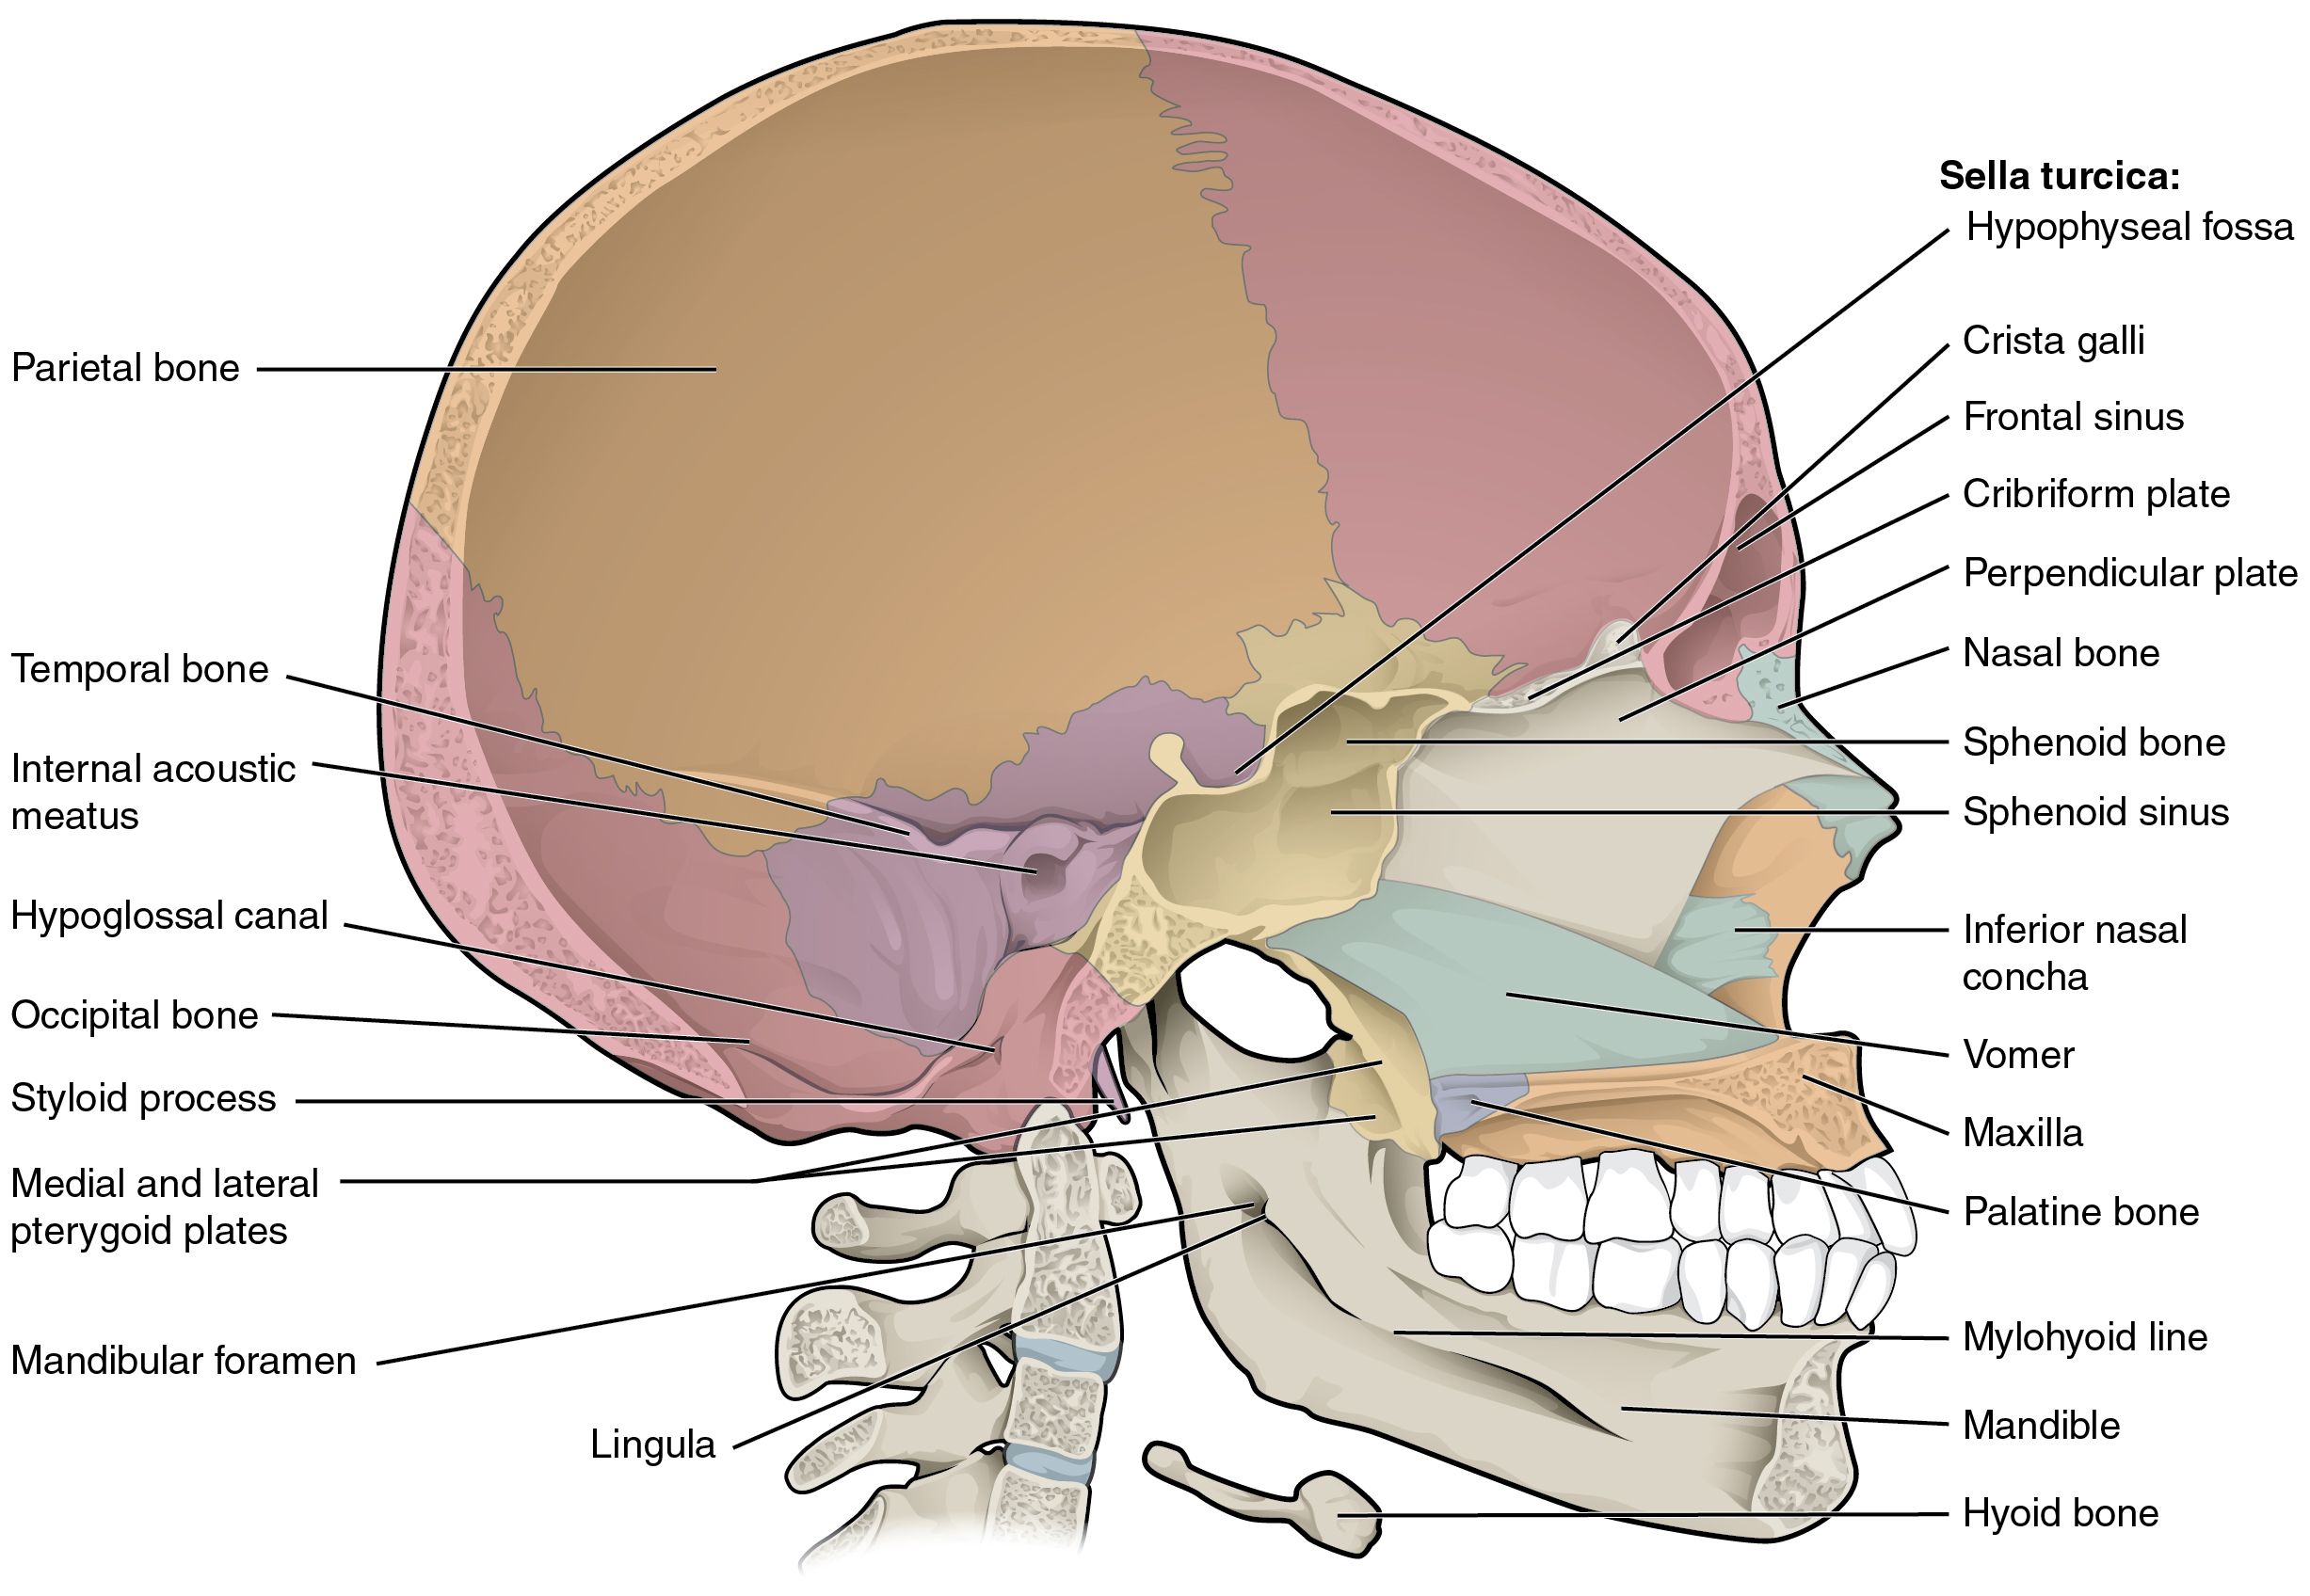 This diagram shows the sagittal section of the skull and identifies the